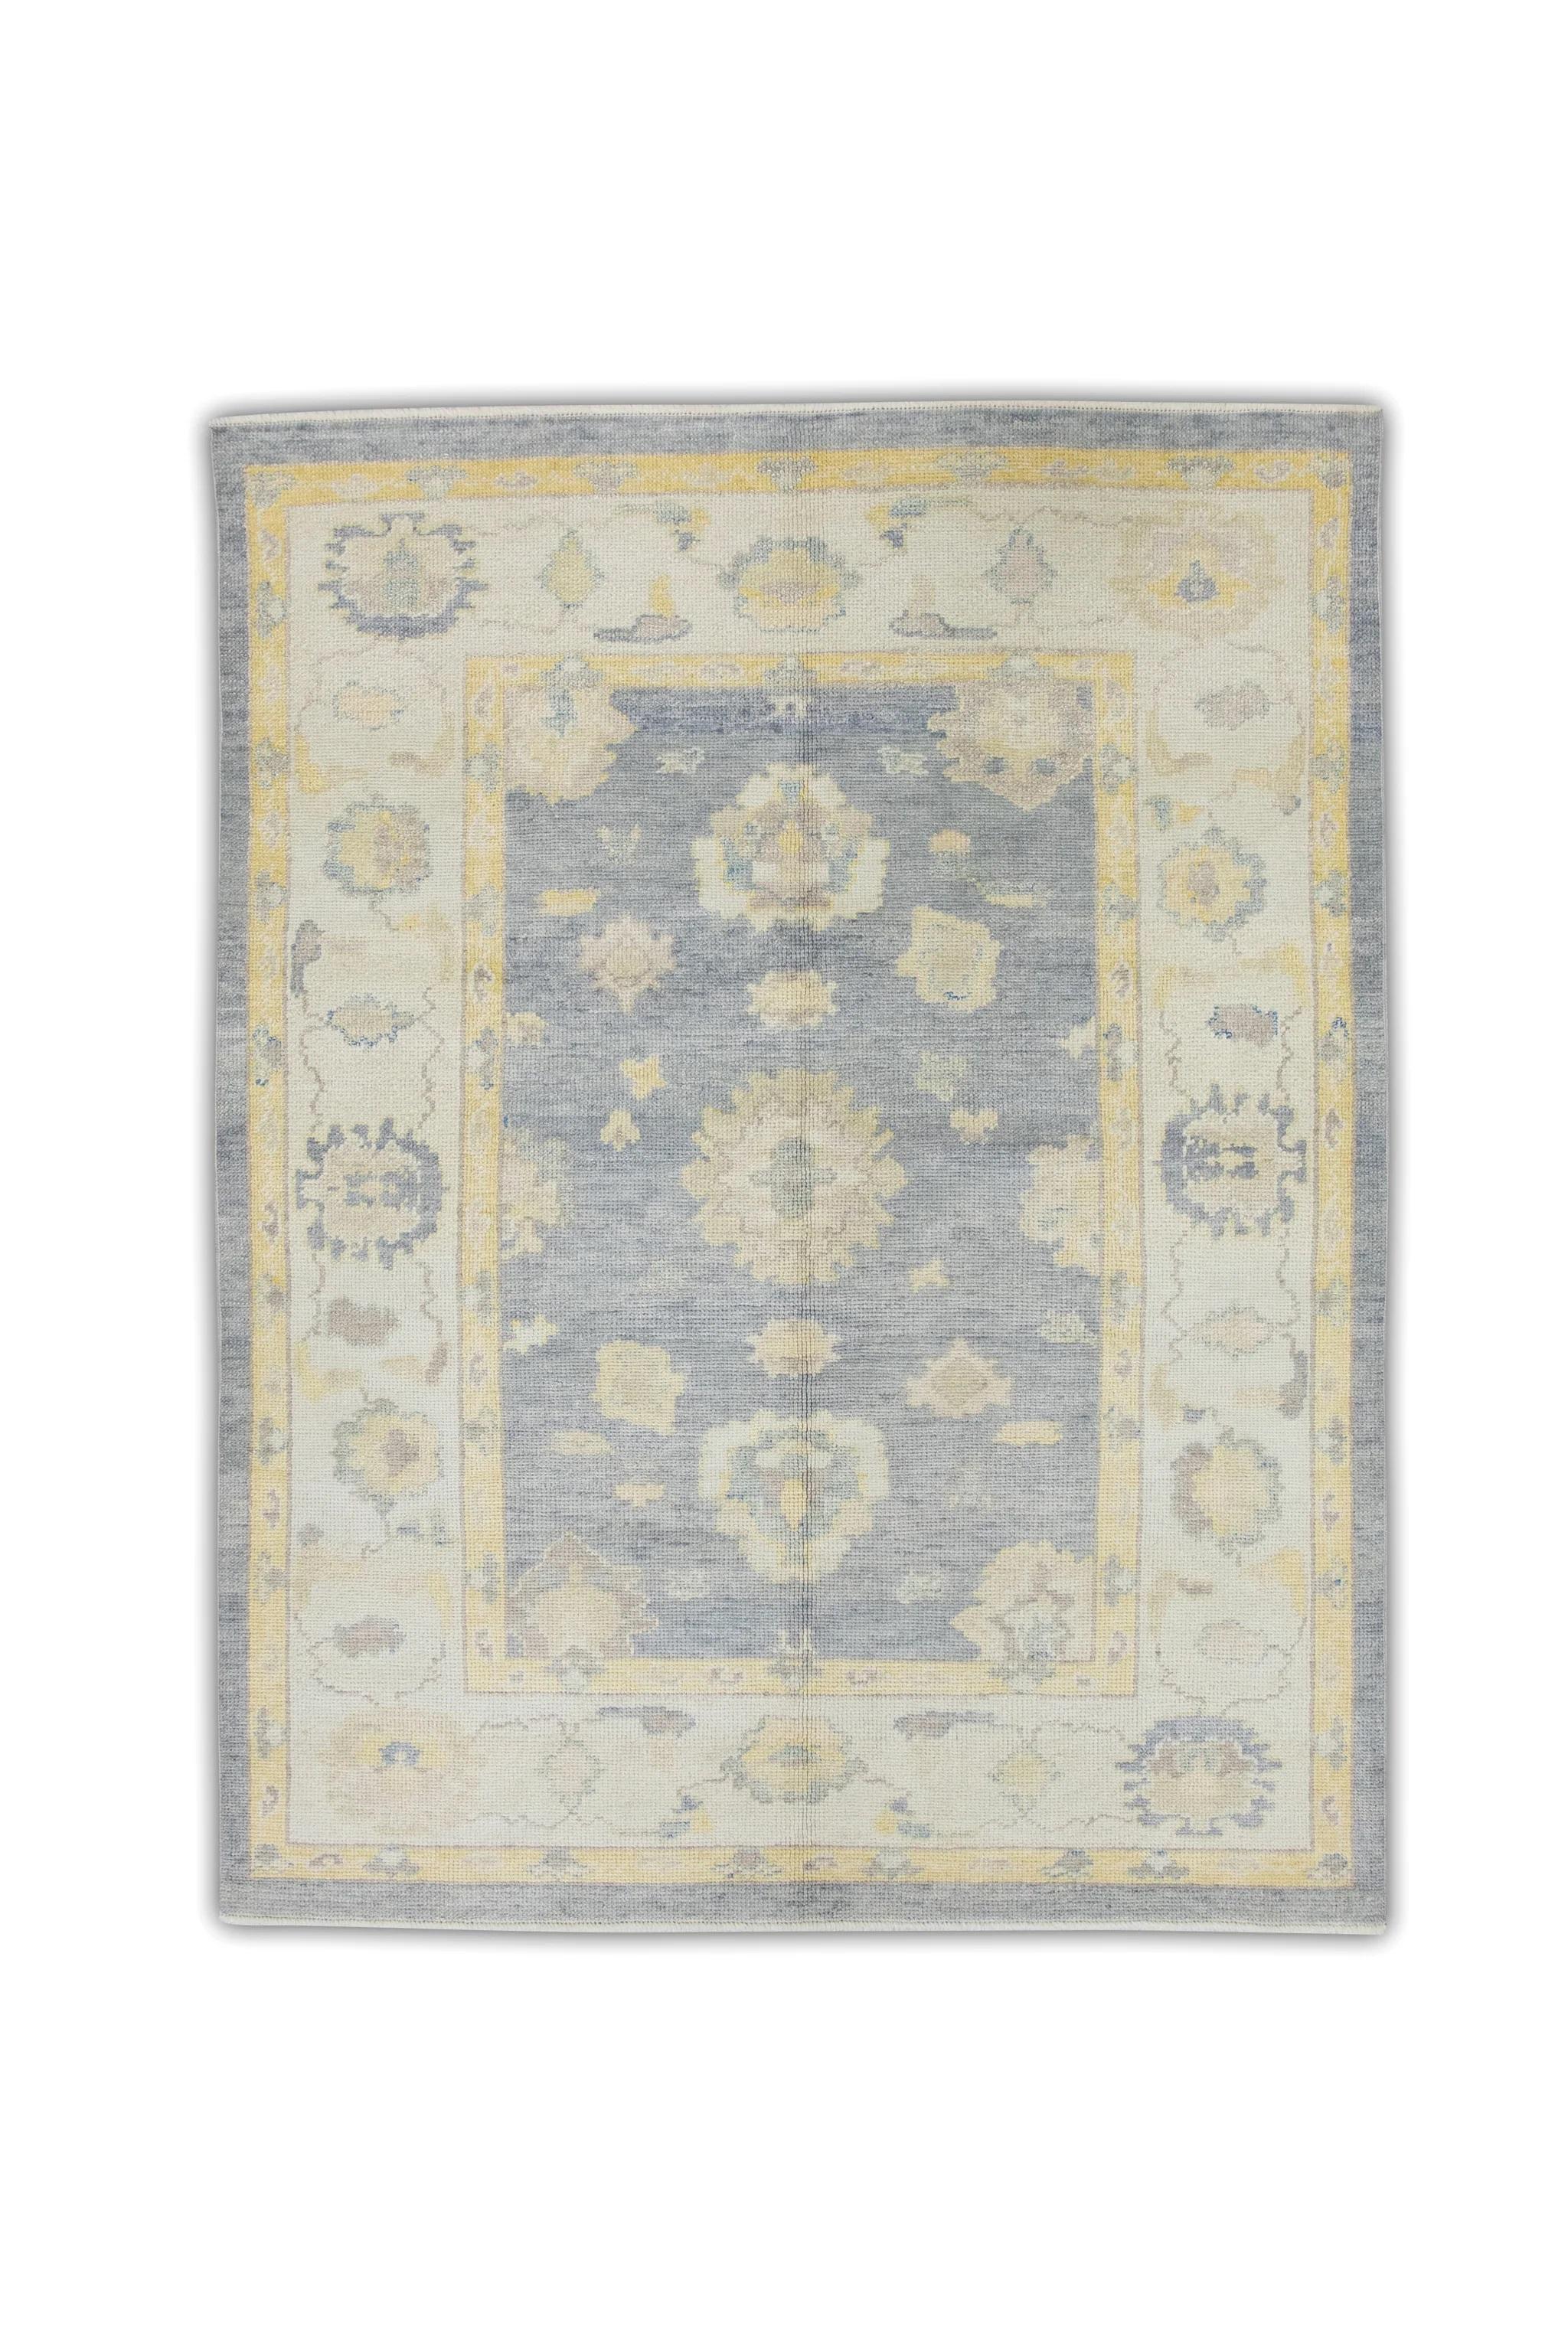 Gray and Yellow Floral Handwoven Wool Turkish Oushak Rug 5'2